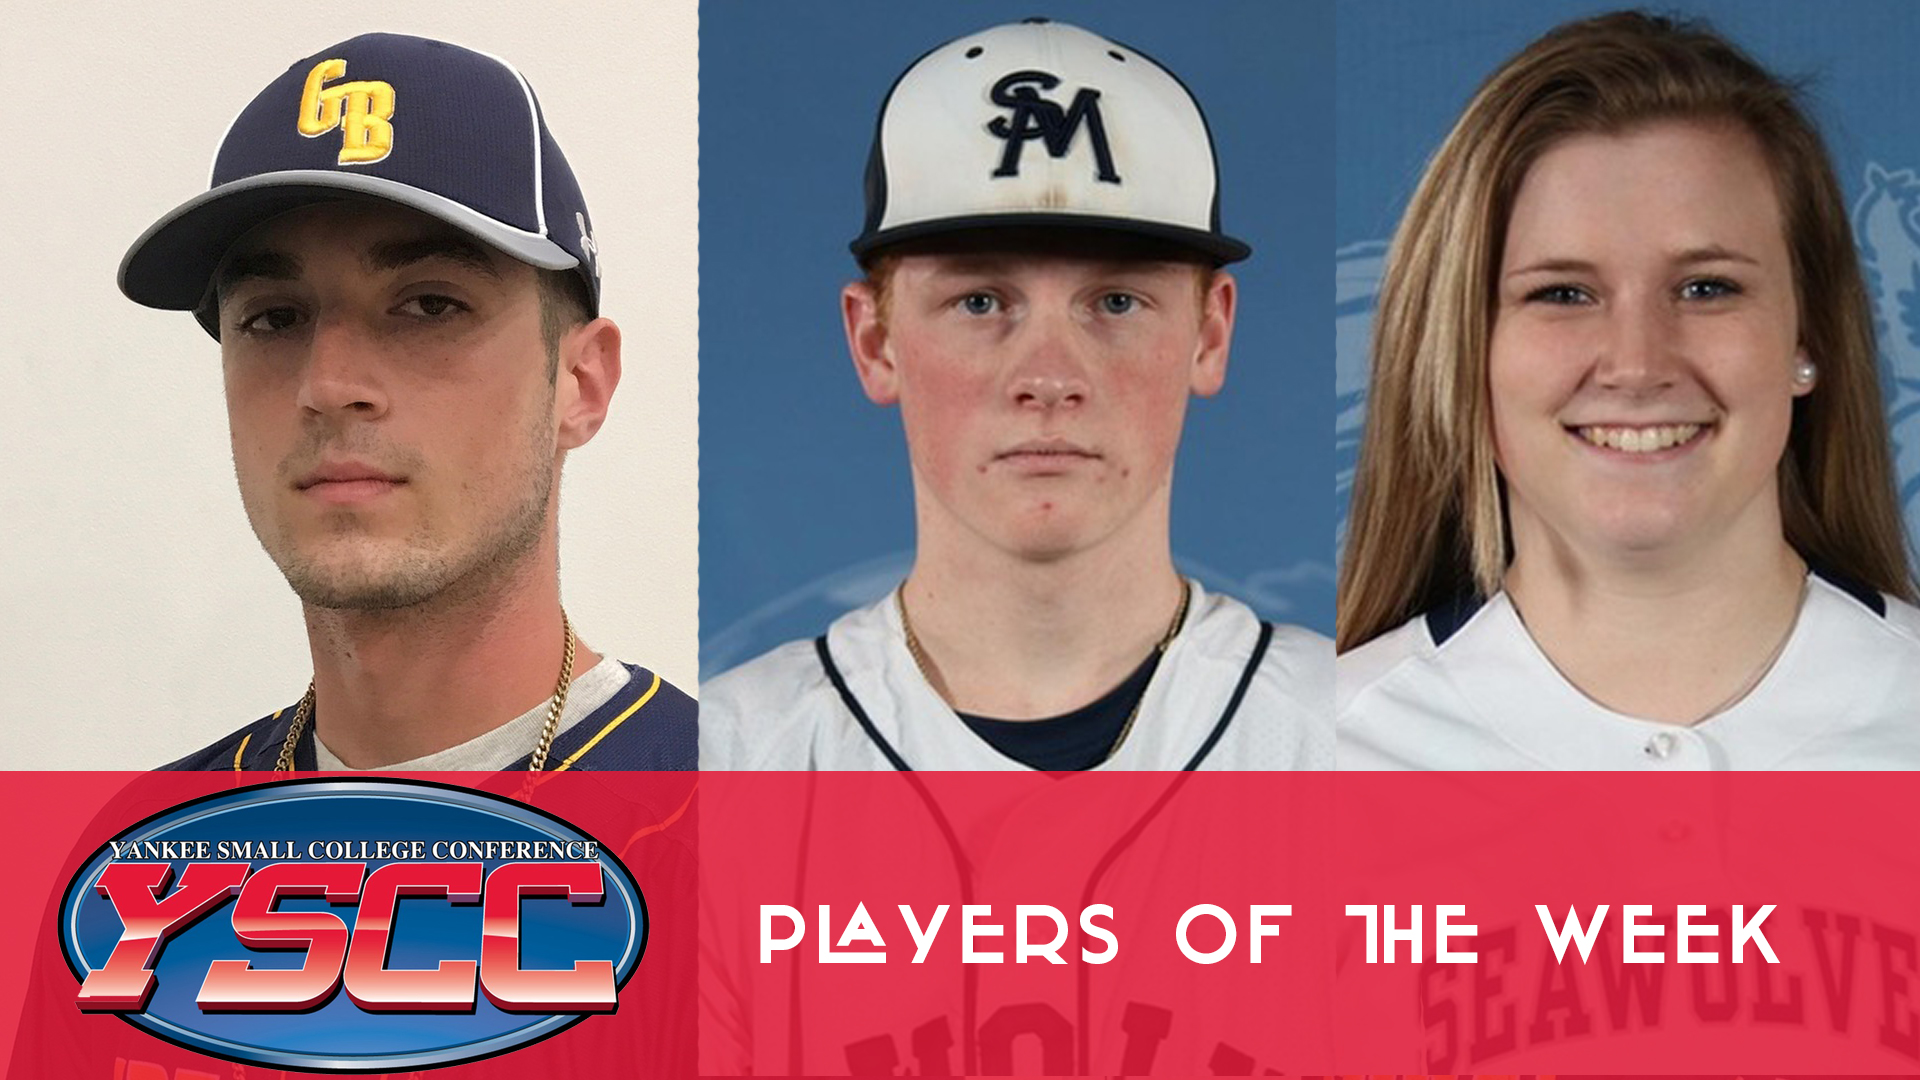 YSCC Player of the Week Awards